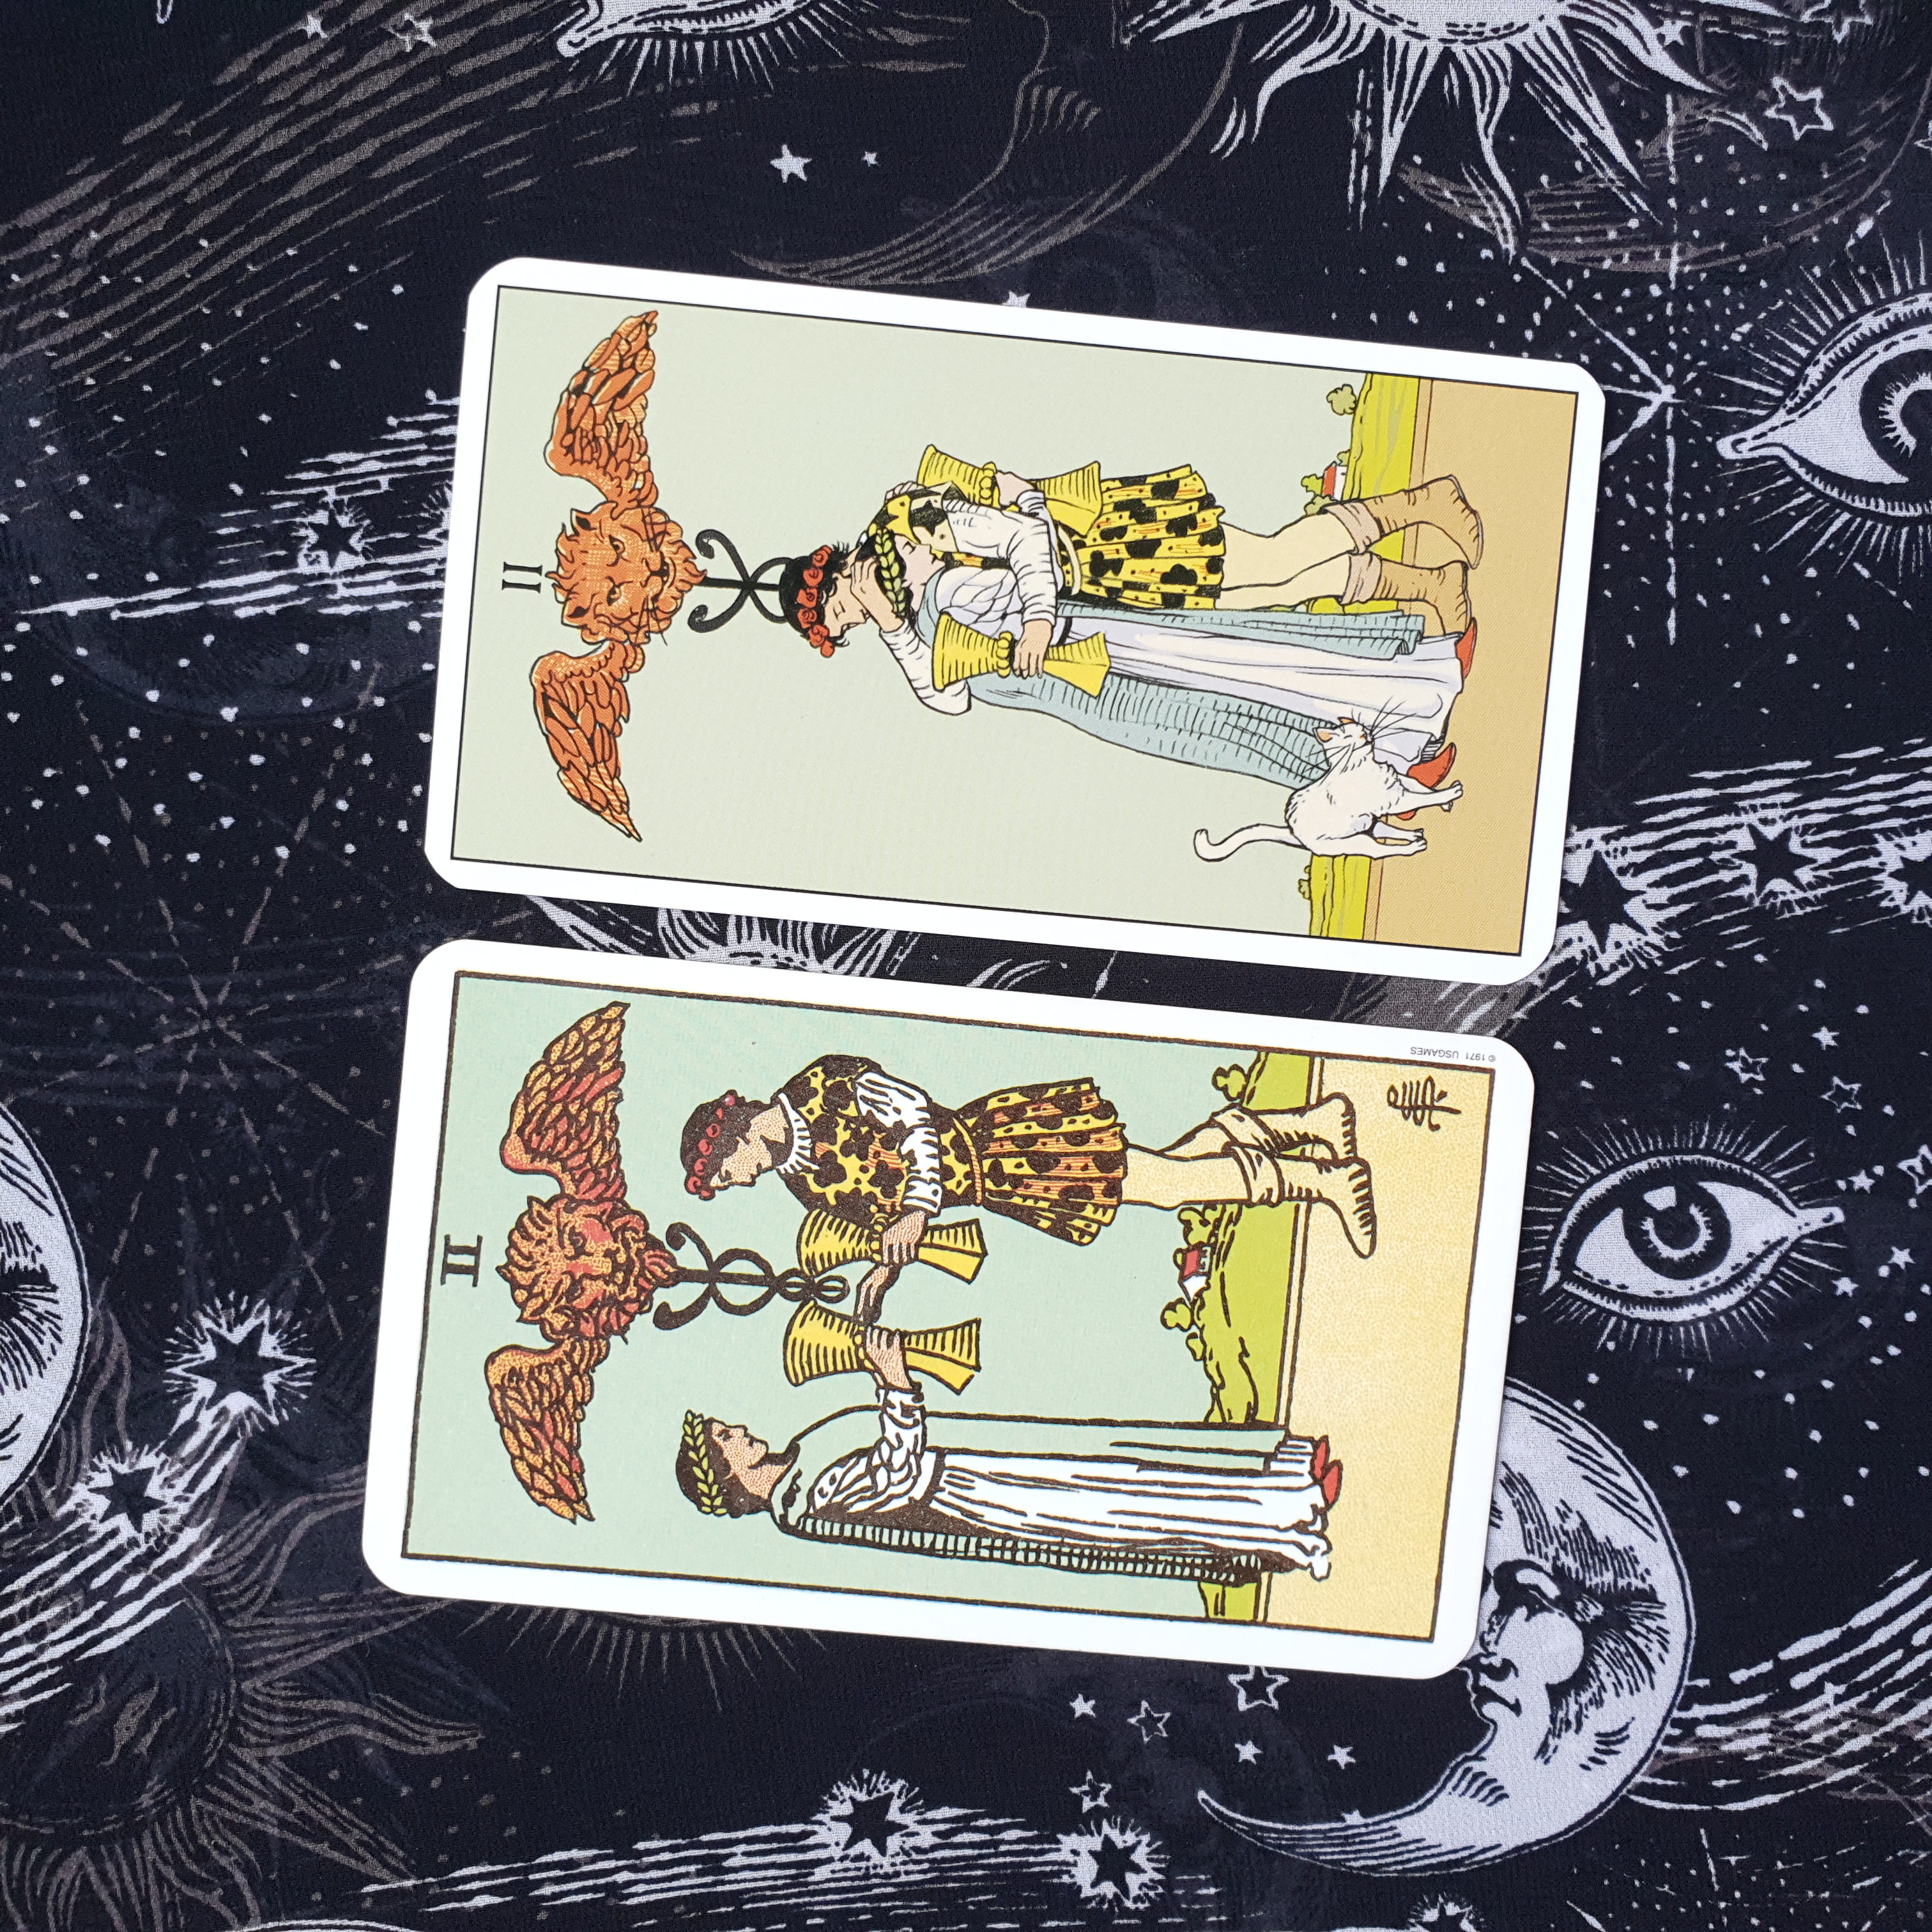 A photo of the Two of Cups card from the Original Rider Waite Smith Tarot and the After Tarot